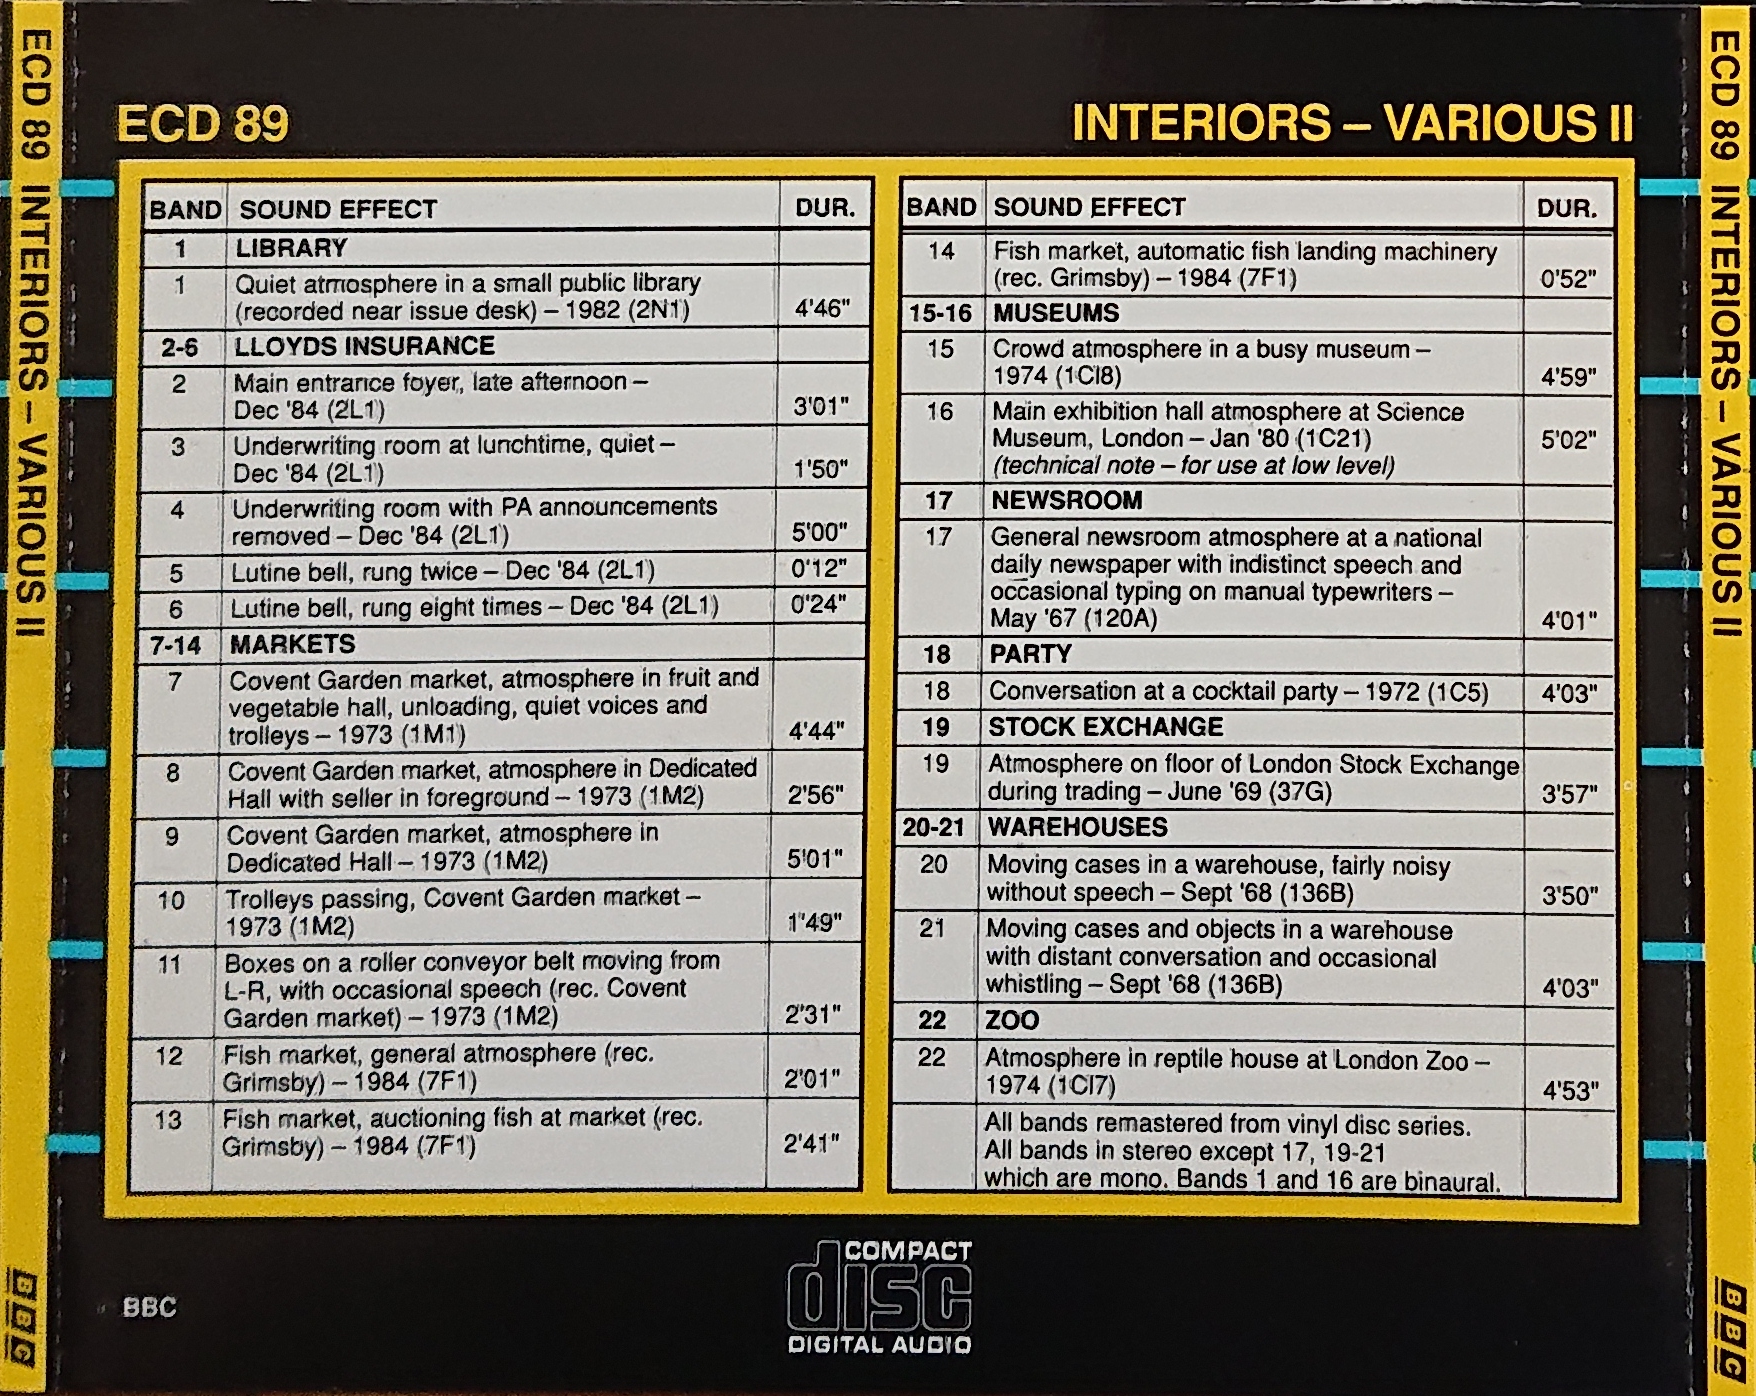 Picture of ECD 89 Interiors - Various II by artist Various from the BBC records and Tapes library